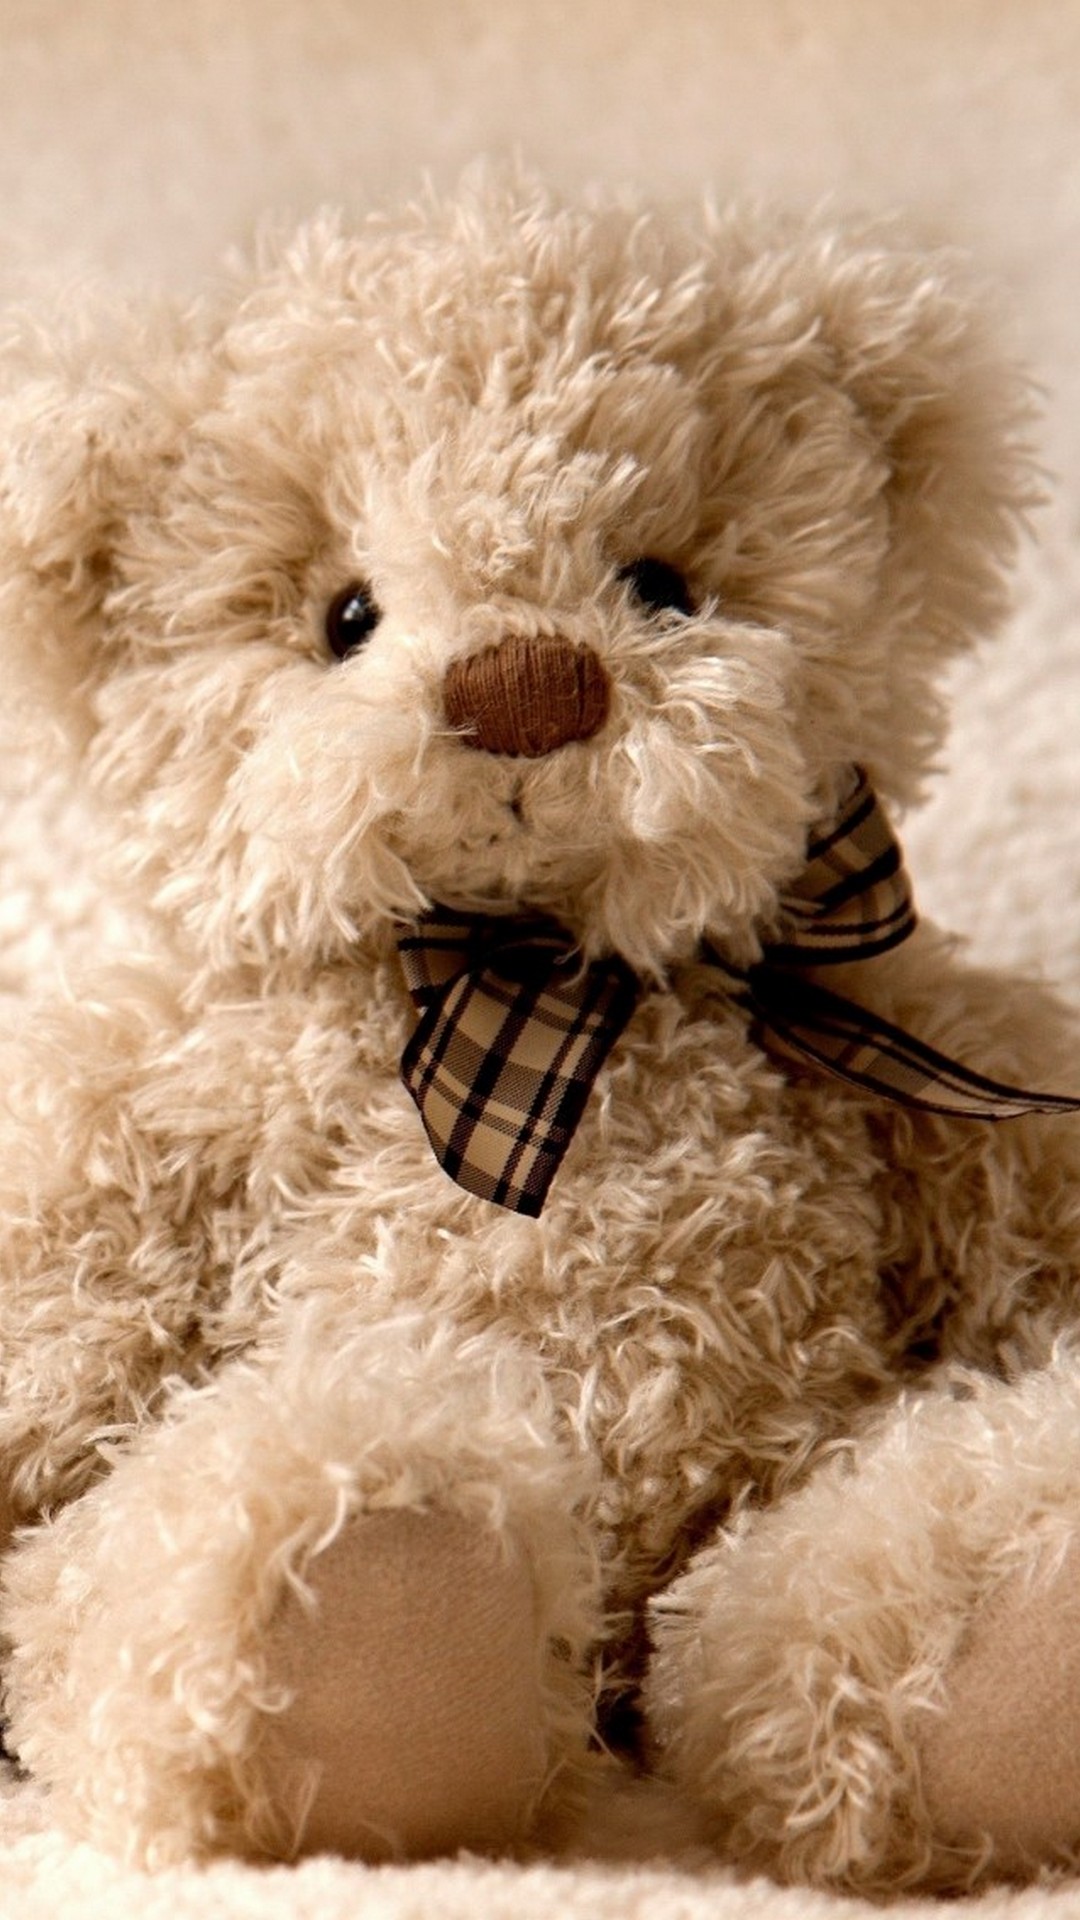 Cute Teddy Bear iPhone Wallpaper with resolution 1080X1920 pixel. You can make this wallpaper for your iPhone 5, 6, 7, 8, X backgrounds, Mobile Screensaver, or iPad Lock Screen